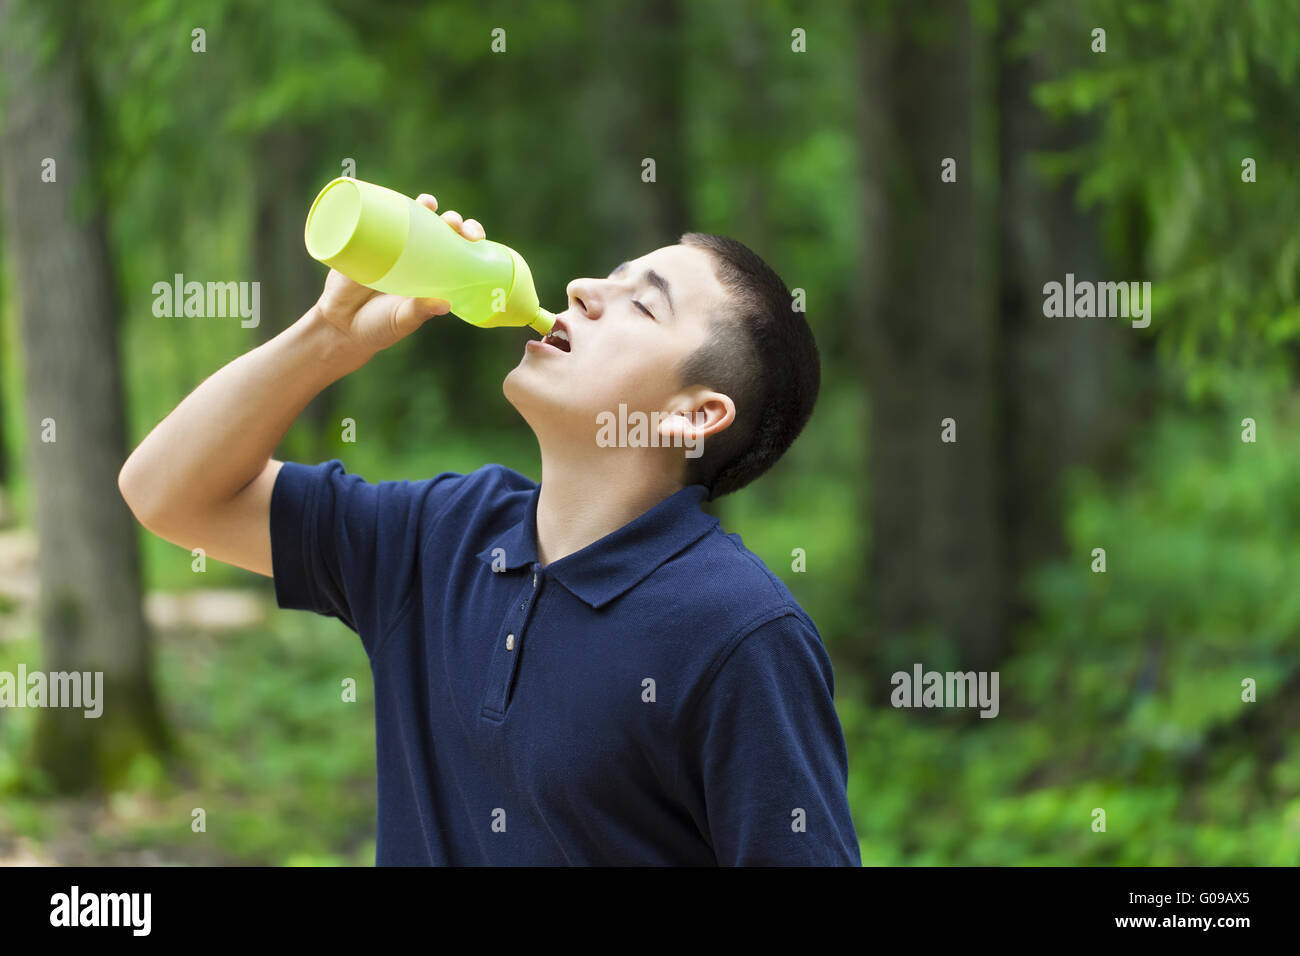 https://c8.alamy.com/comp/G09AX5/boy-with-water-bottle-on-jogging-trail-in-the-woo-G09AX5.jpg